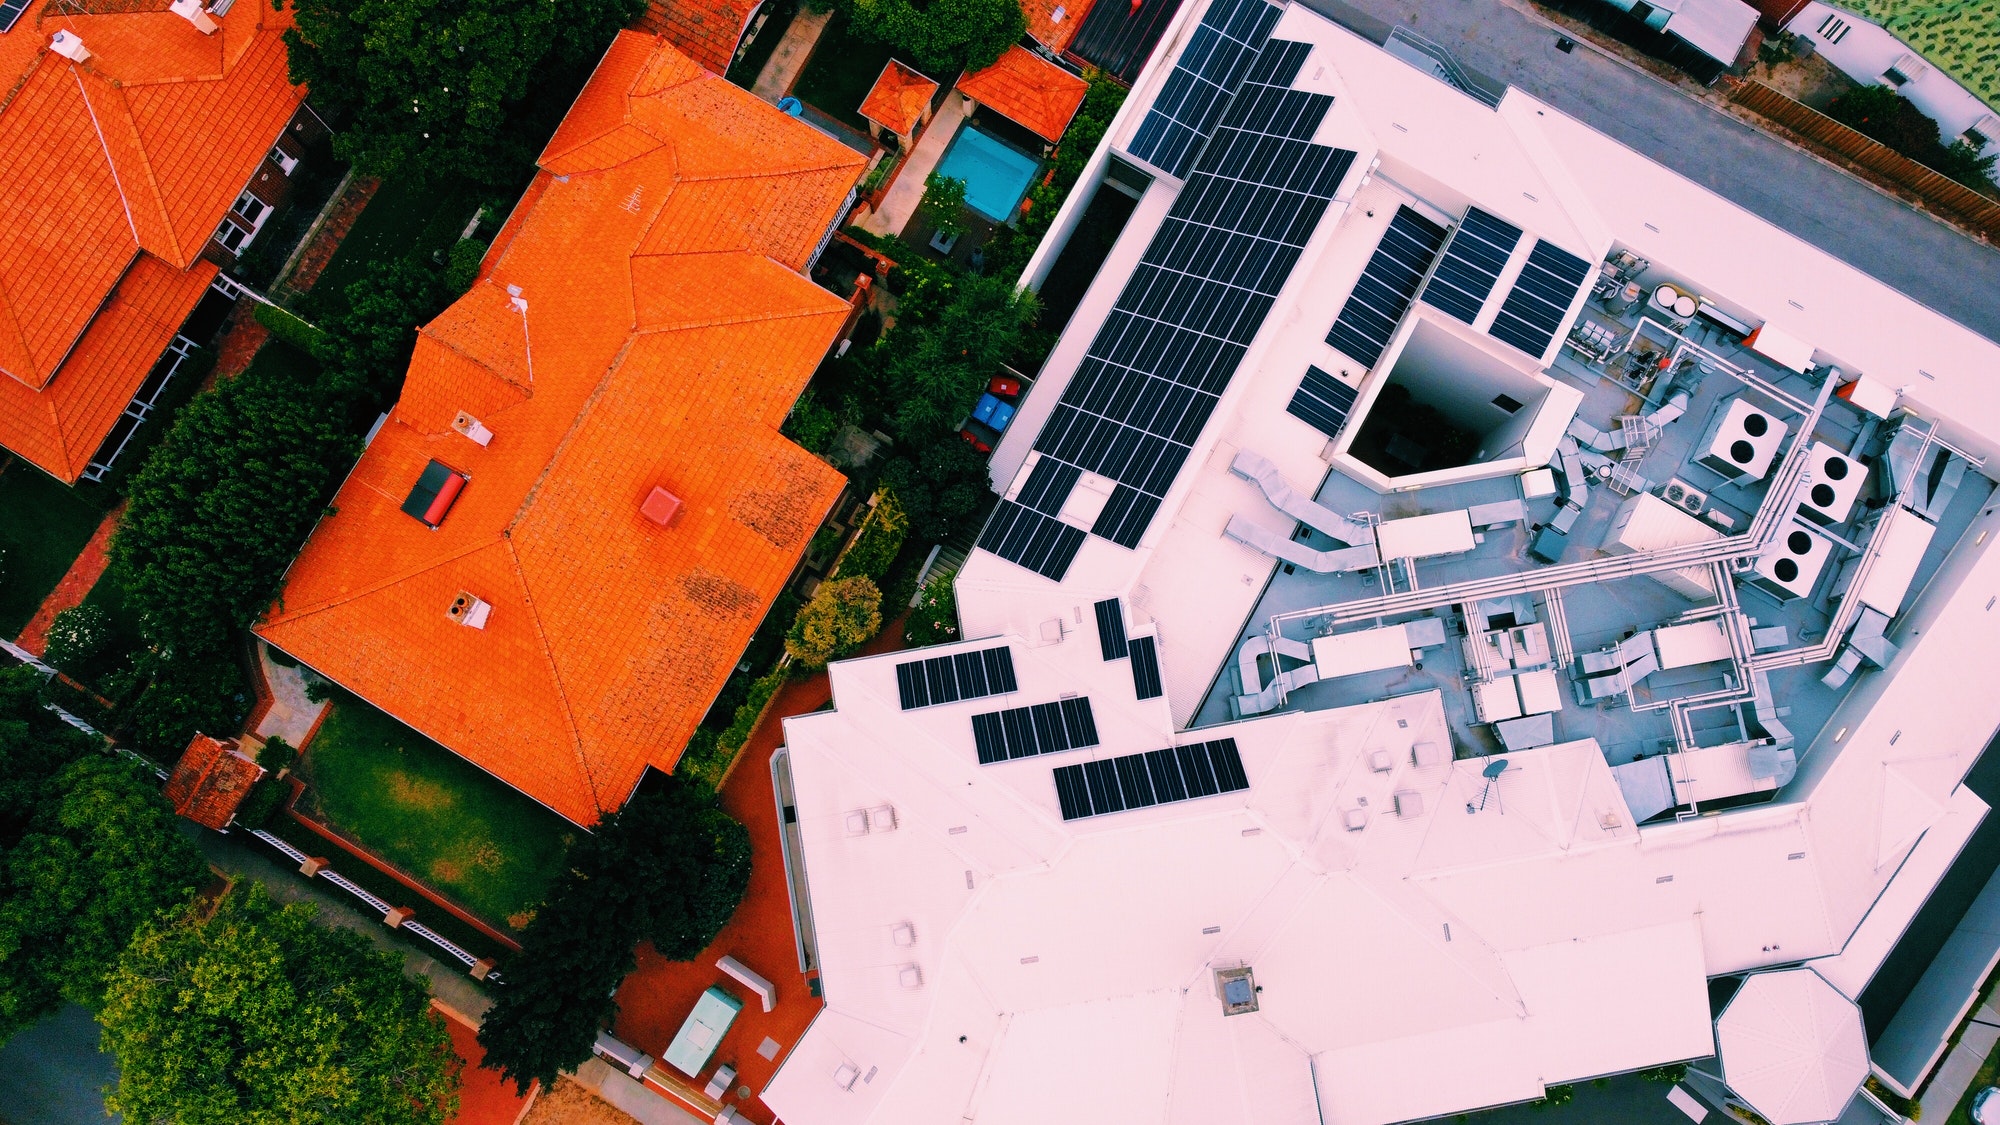 Aerial view of solar panels on the roofs